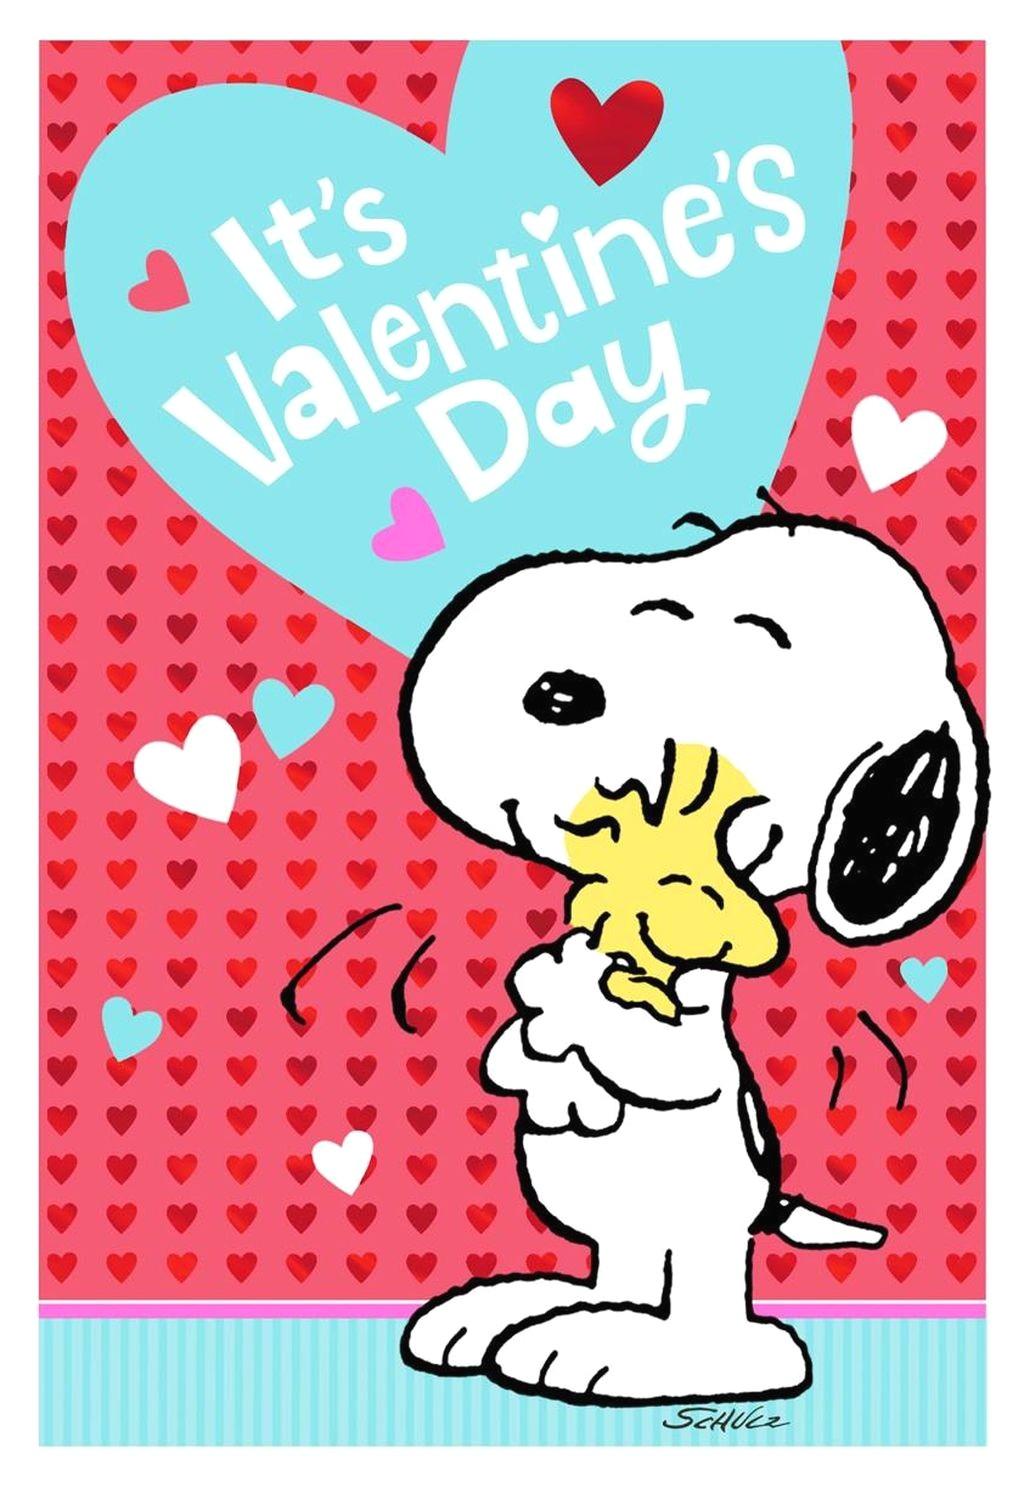 peanuts valentines wallpaper (53+ images) on valentines day peanuts characters wallpapers